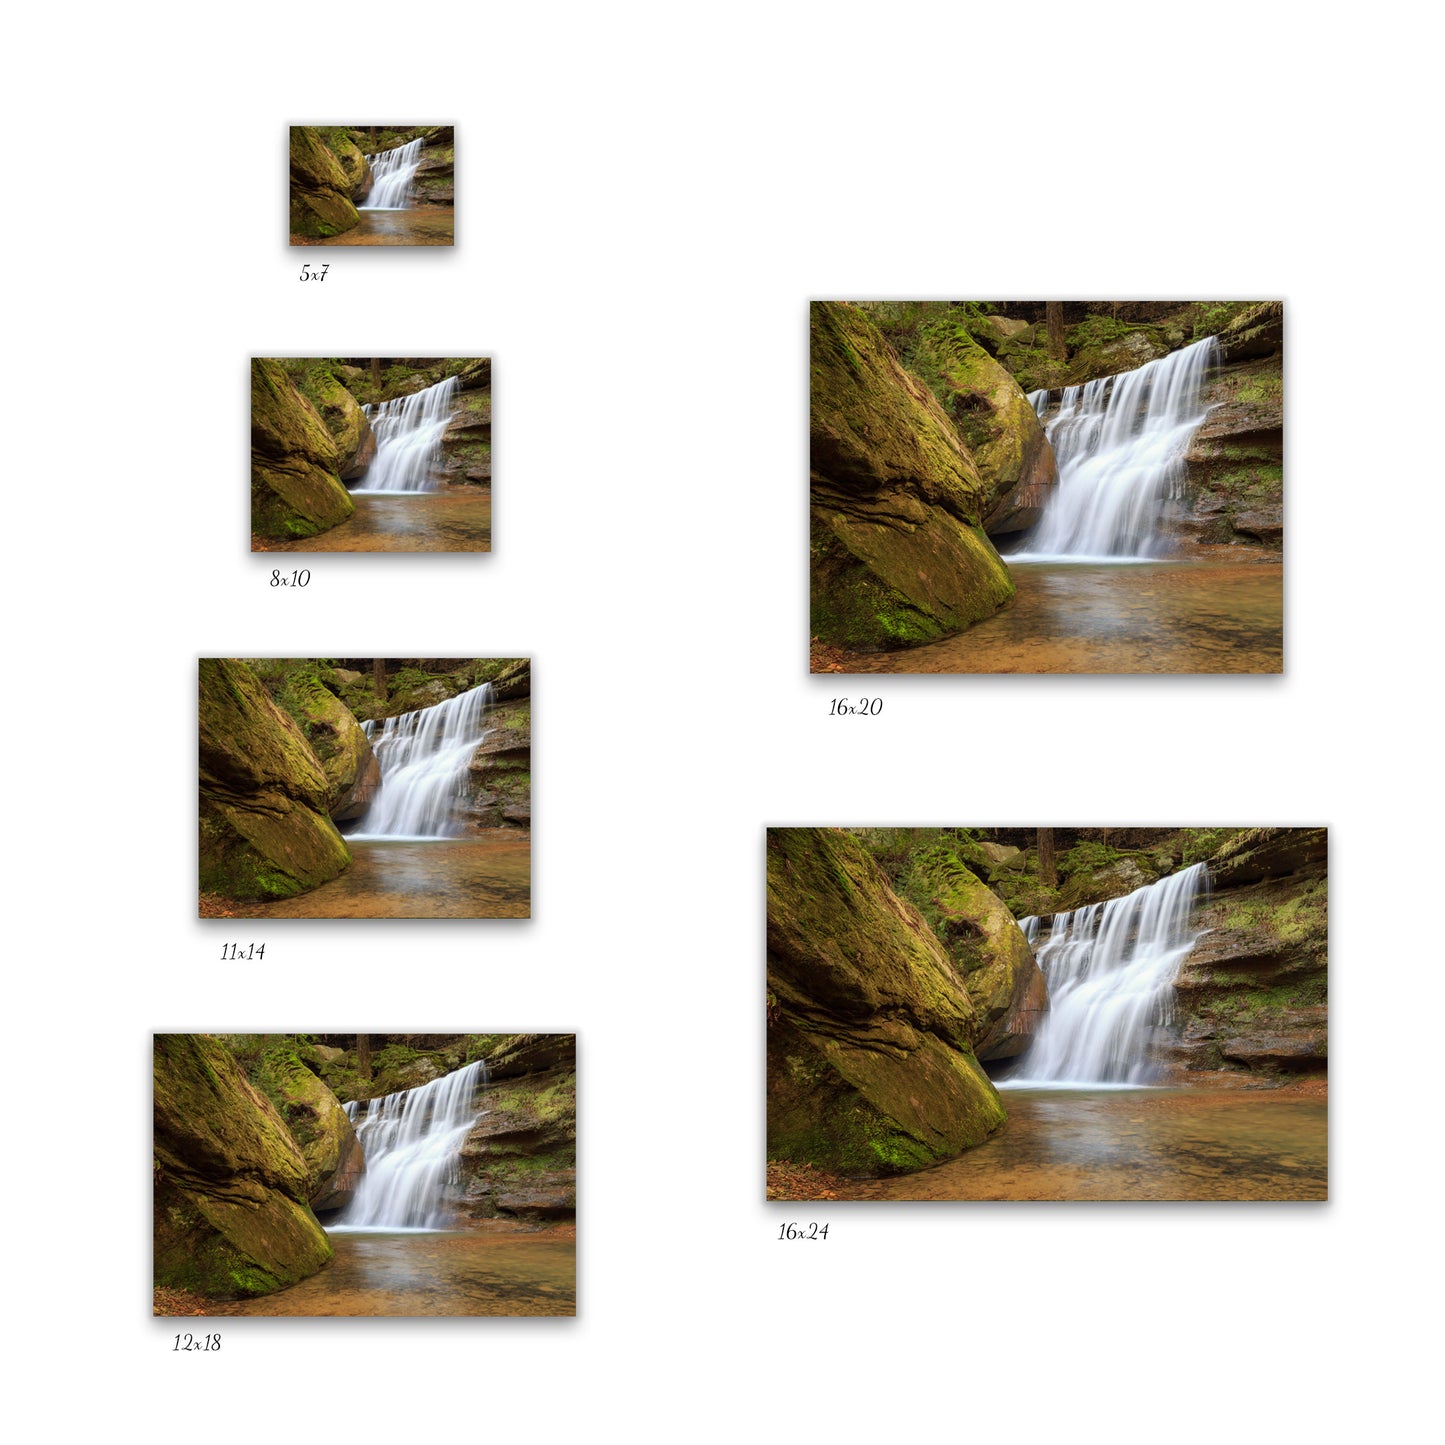 Visual representation of Hidden Falls wall art print sizes available: 5x7, 8x10, 11x14, 12x18, 16x20, and 16x24.